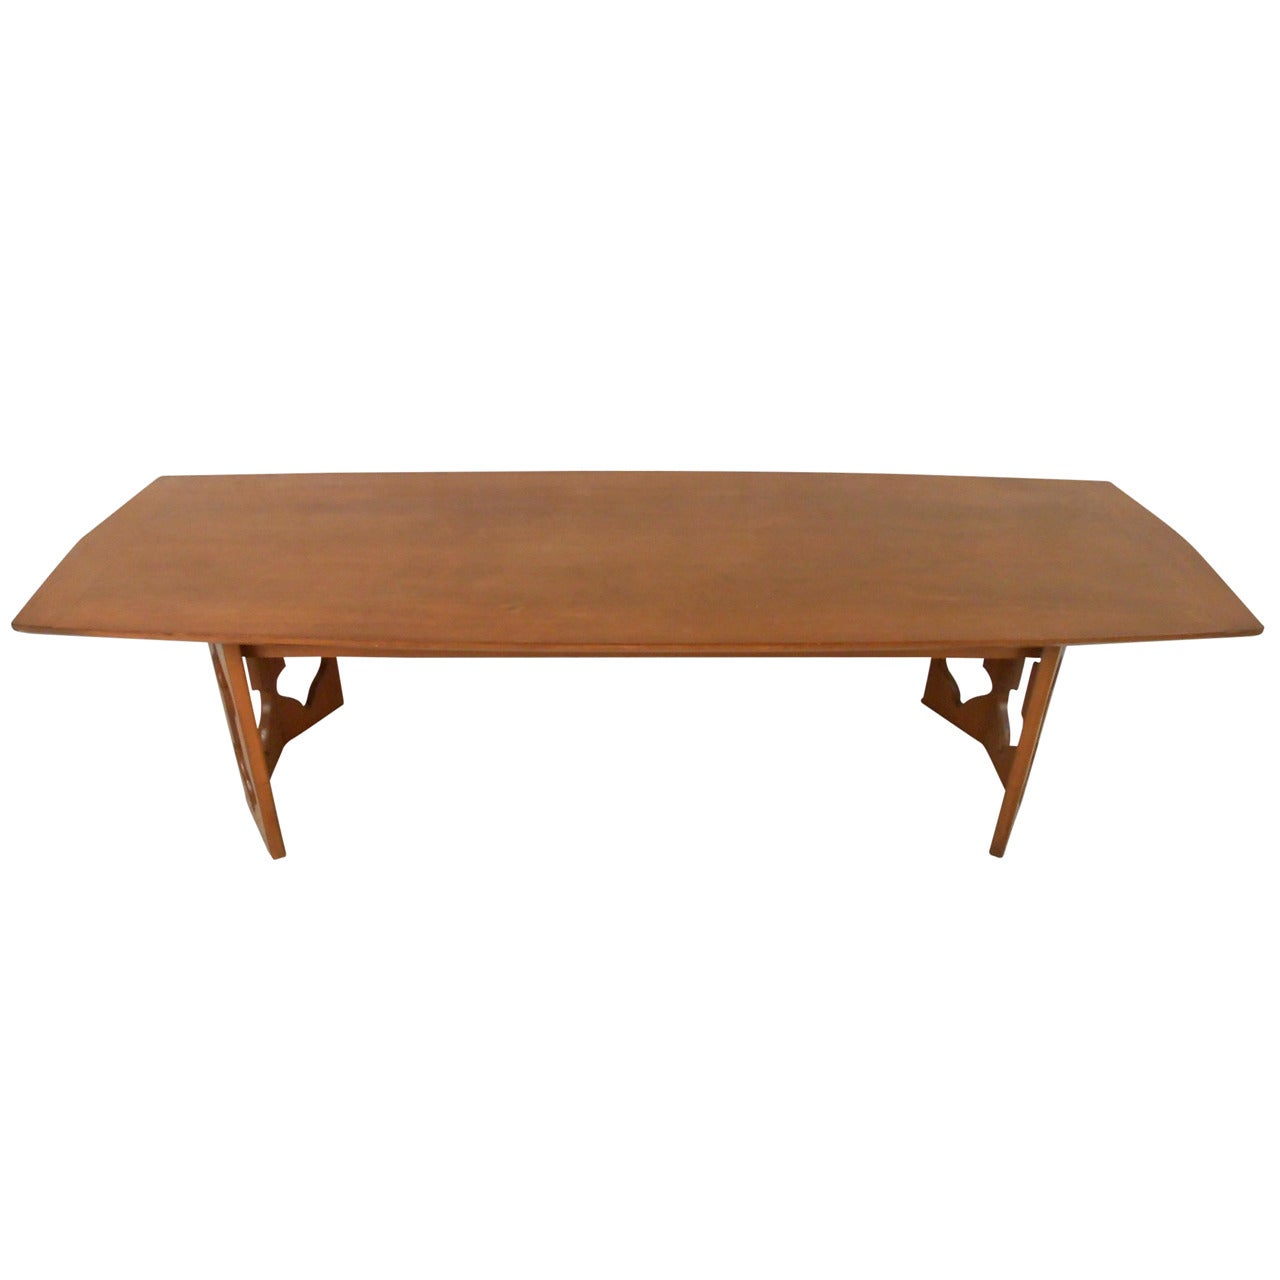 This wonderful mixture of clean mid-century design with unique sculptural style base adds a unique table to any seating area. Perfect for living room or waiting room this subtle mid-century addition is versatile and well-constructed. Please confirm